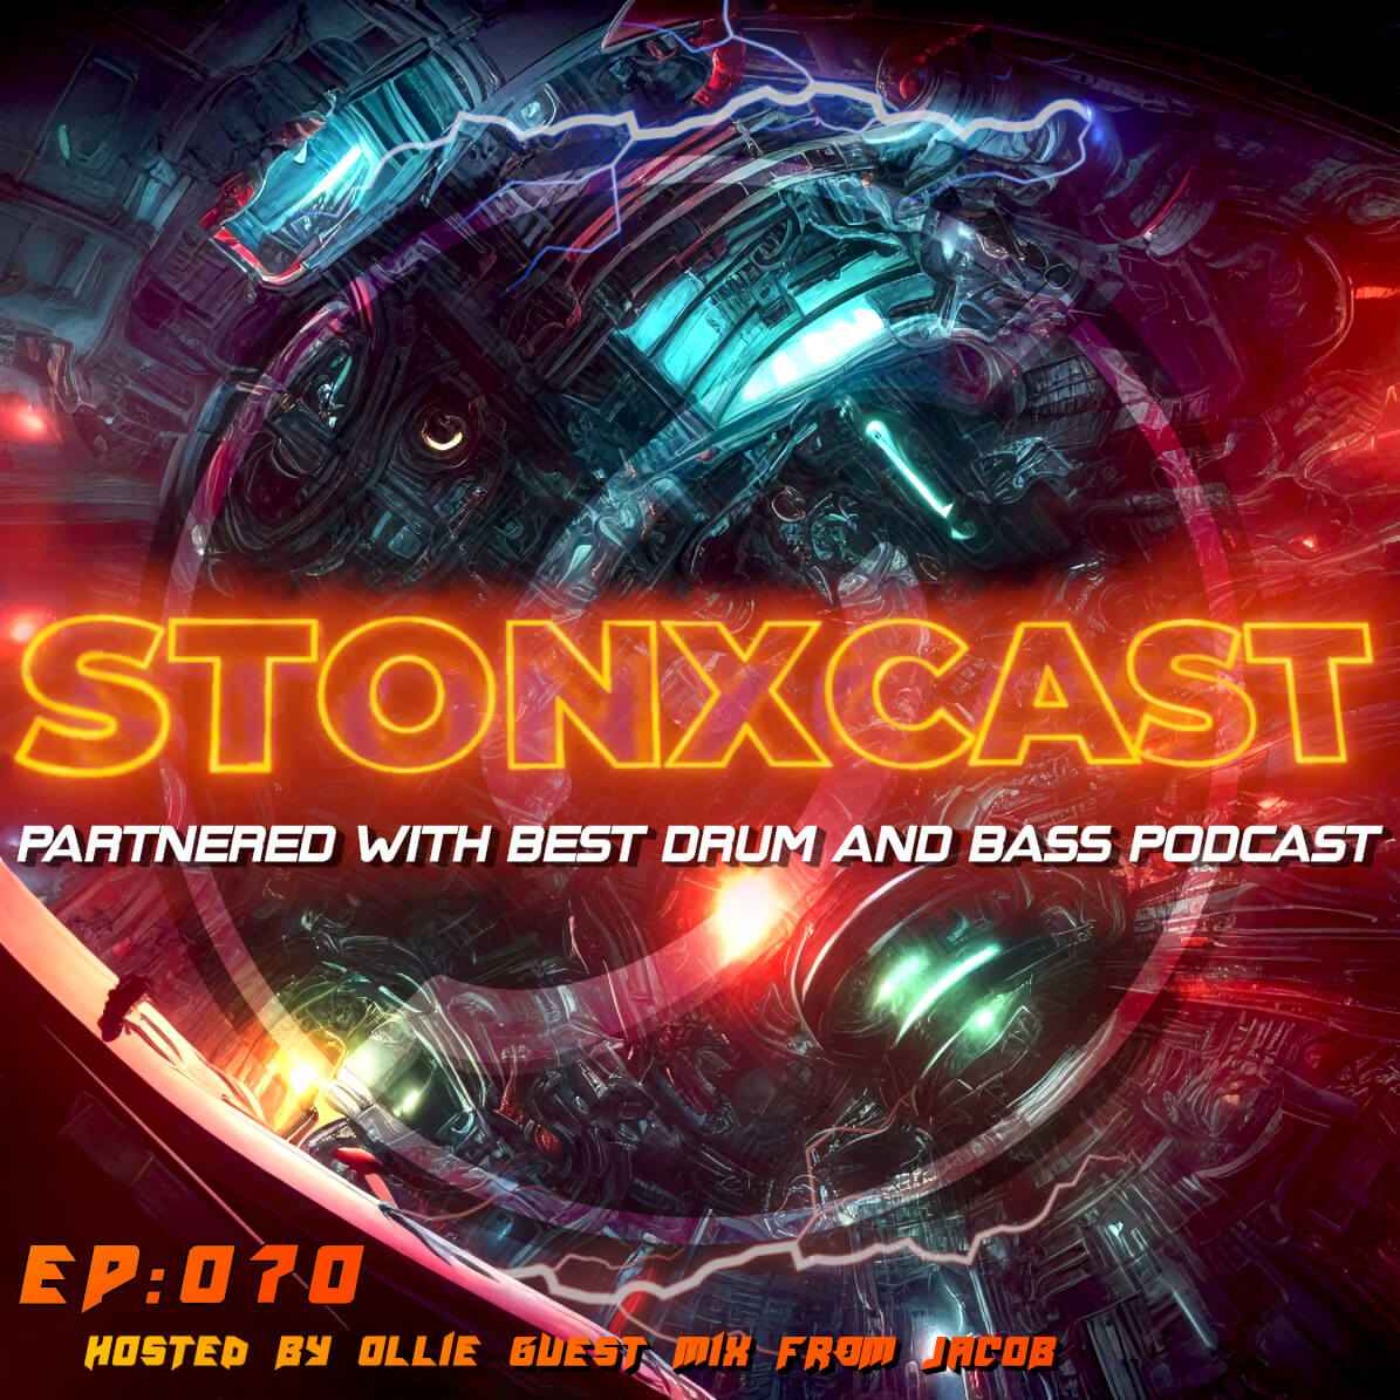 Stonxcast EP:070 - Hosted by Ollie Guest Mix From Jacob Artwork